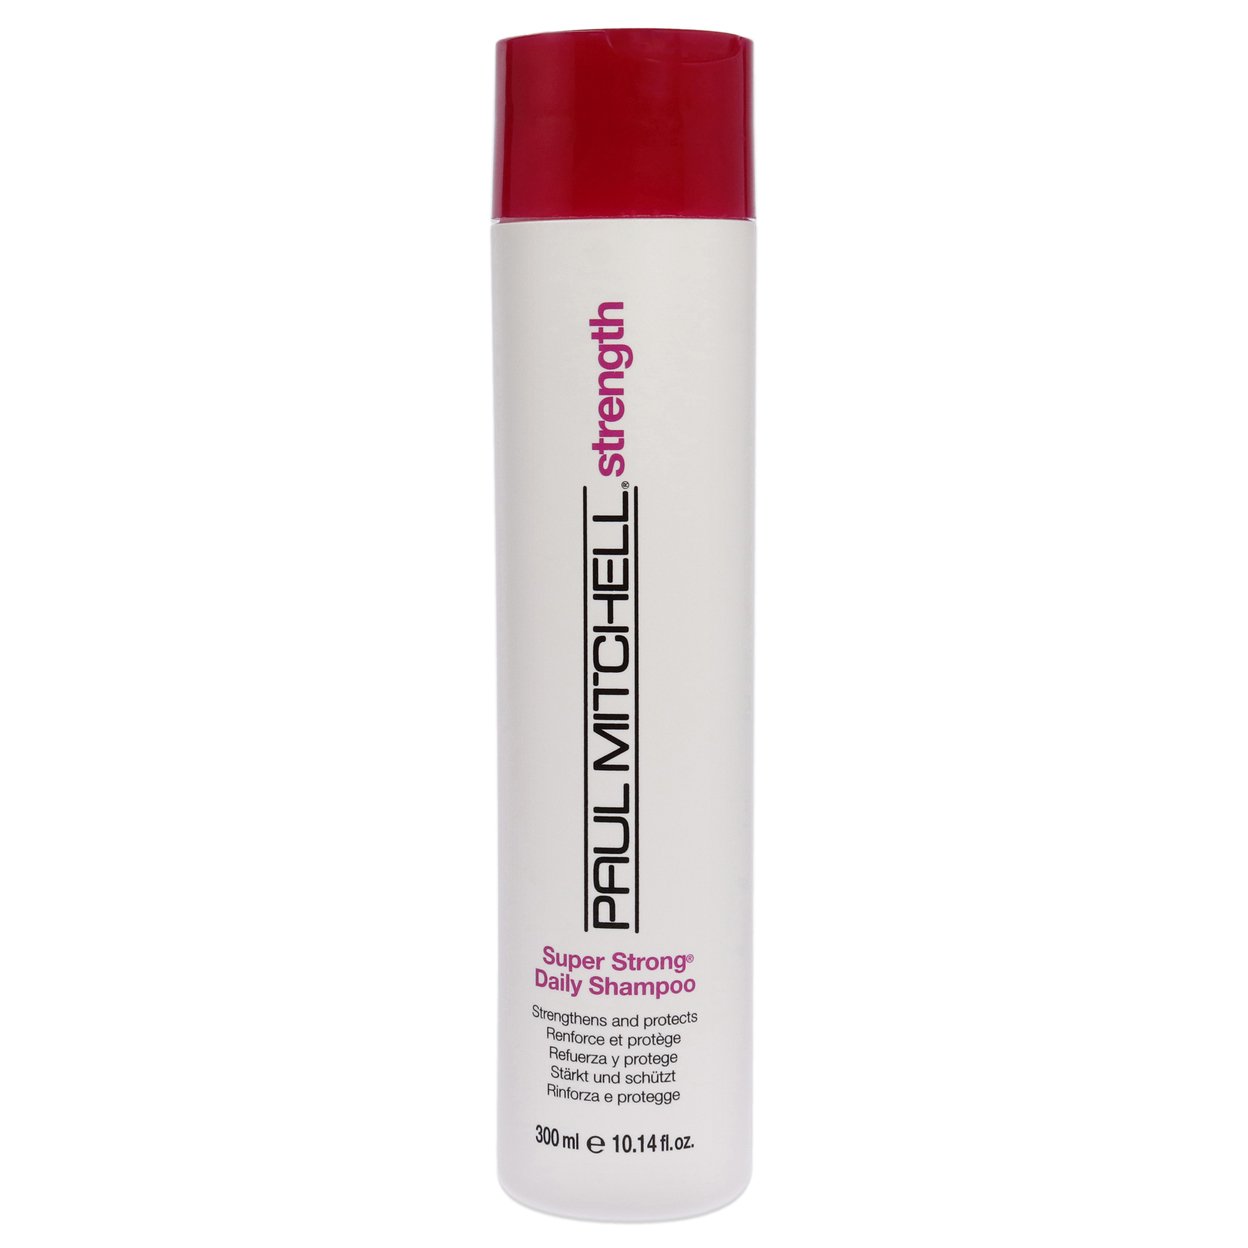 Paul Mitchell Super Strong Daily Shampoo 10.14 Oz